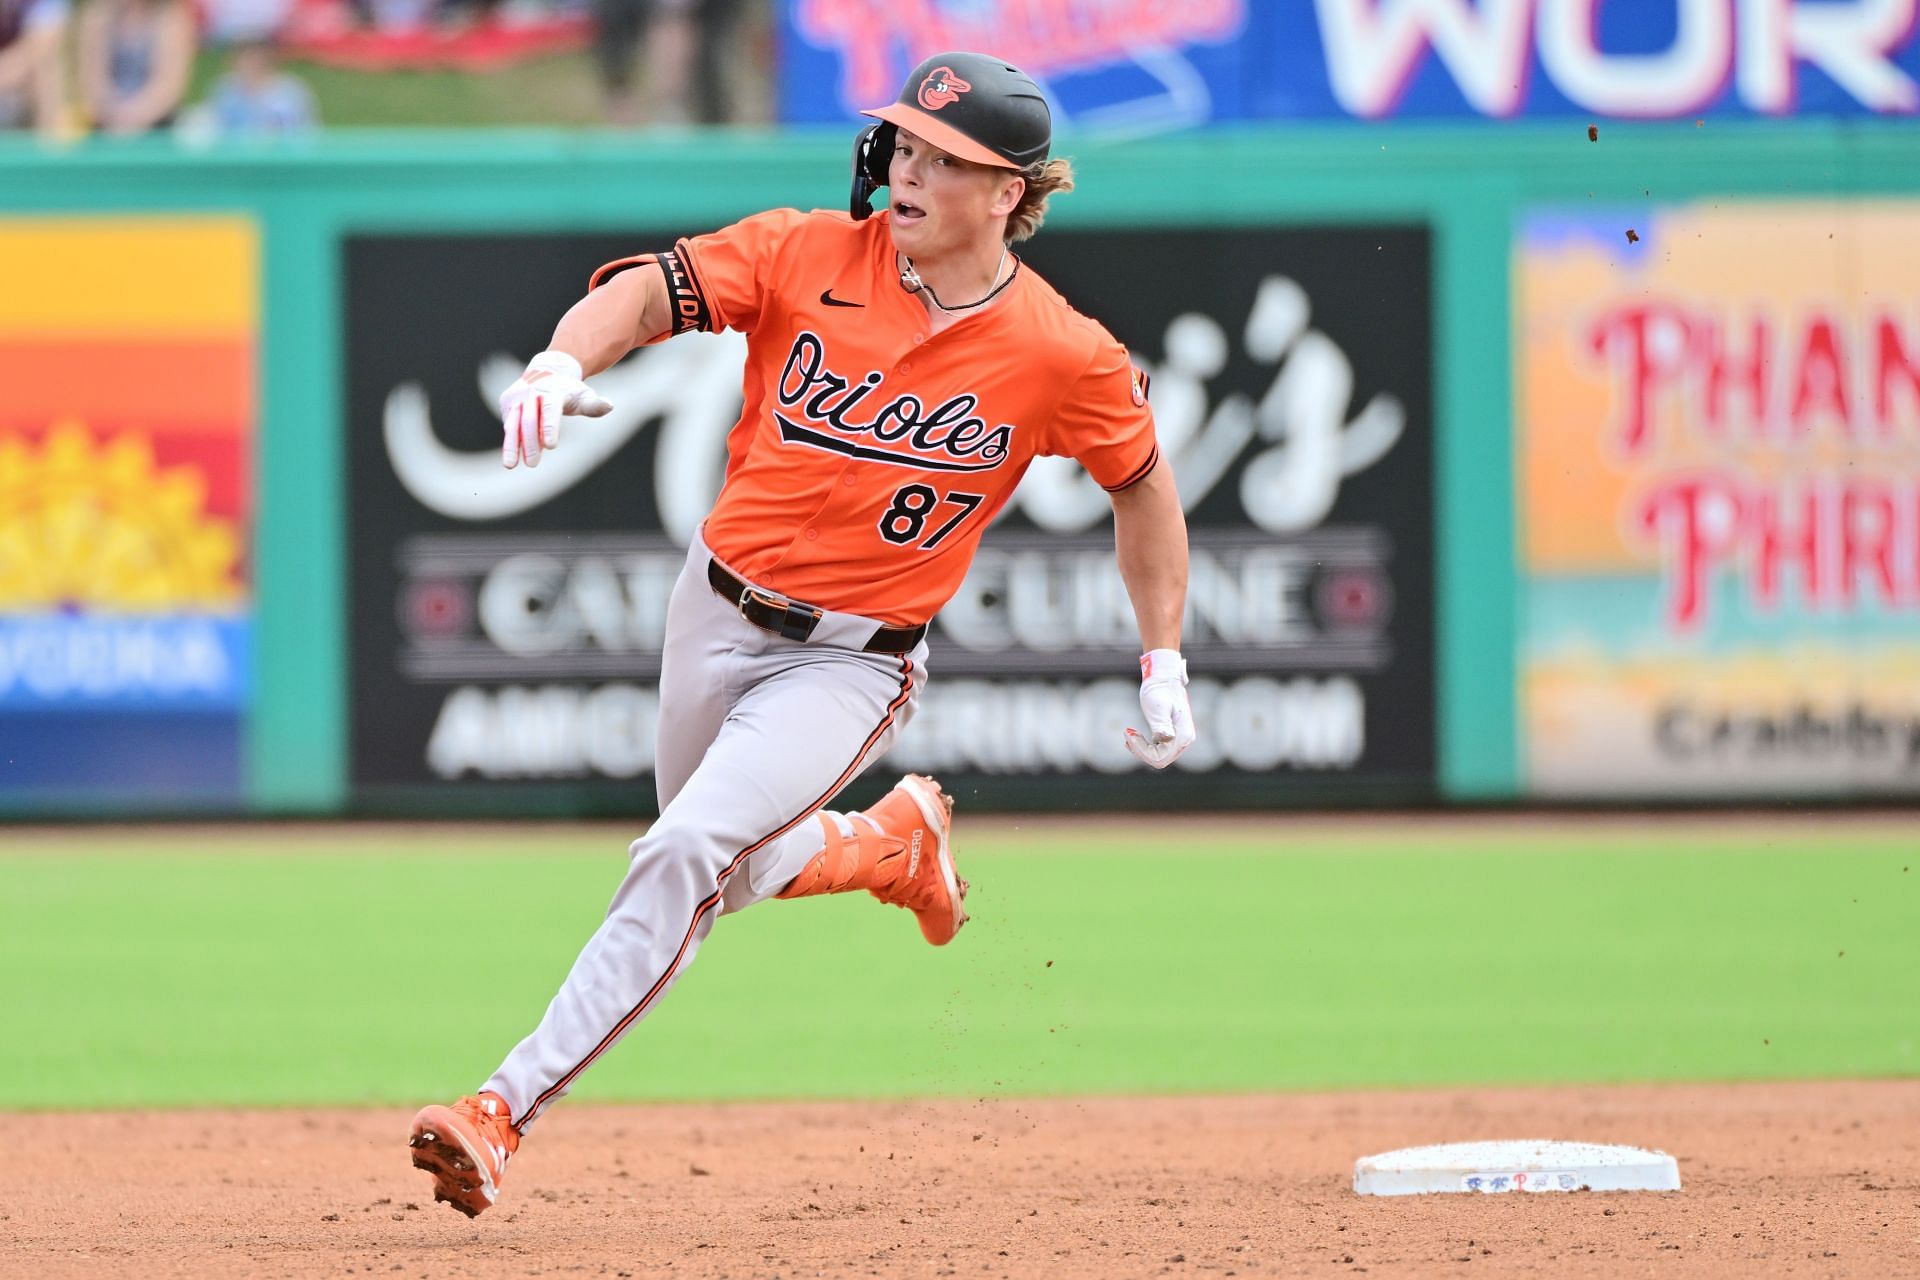 Jackson Holliday of the Baltimore Orioles rounds second base after hitting a triple